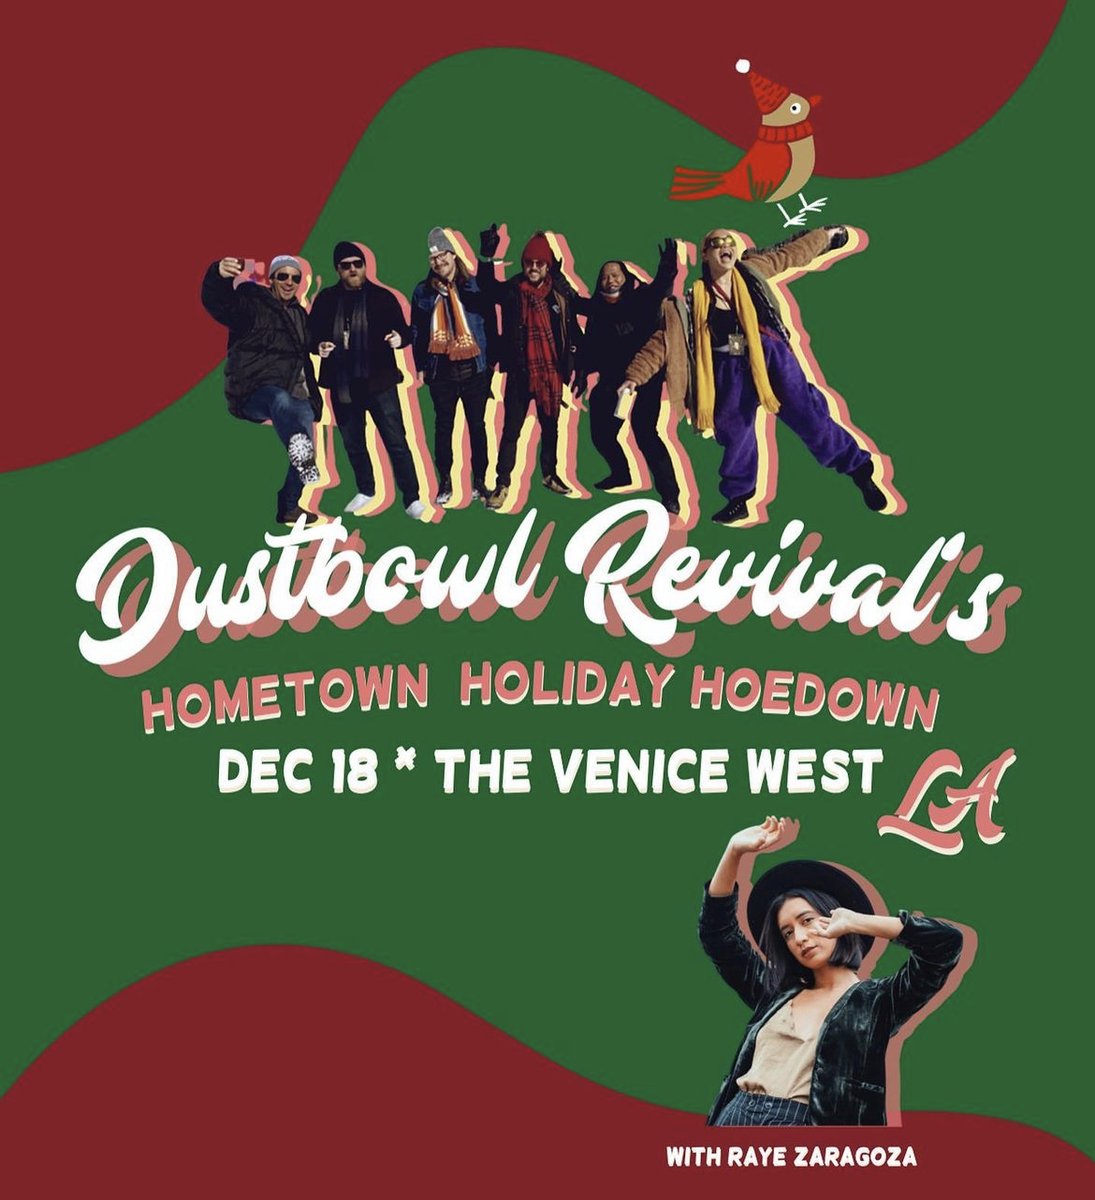 I'm joining @dustbowlrevival for the Hometown Holiday Hoedown on Dec. 18th! Show @ 8 pm at The Venice West! Grab your tickets here: dustbowlrevival.com/tour